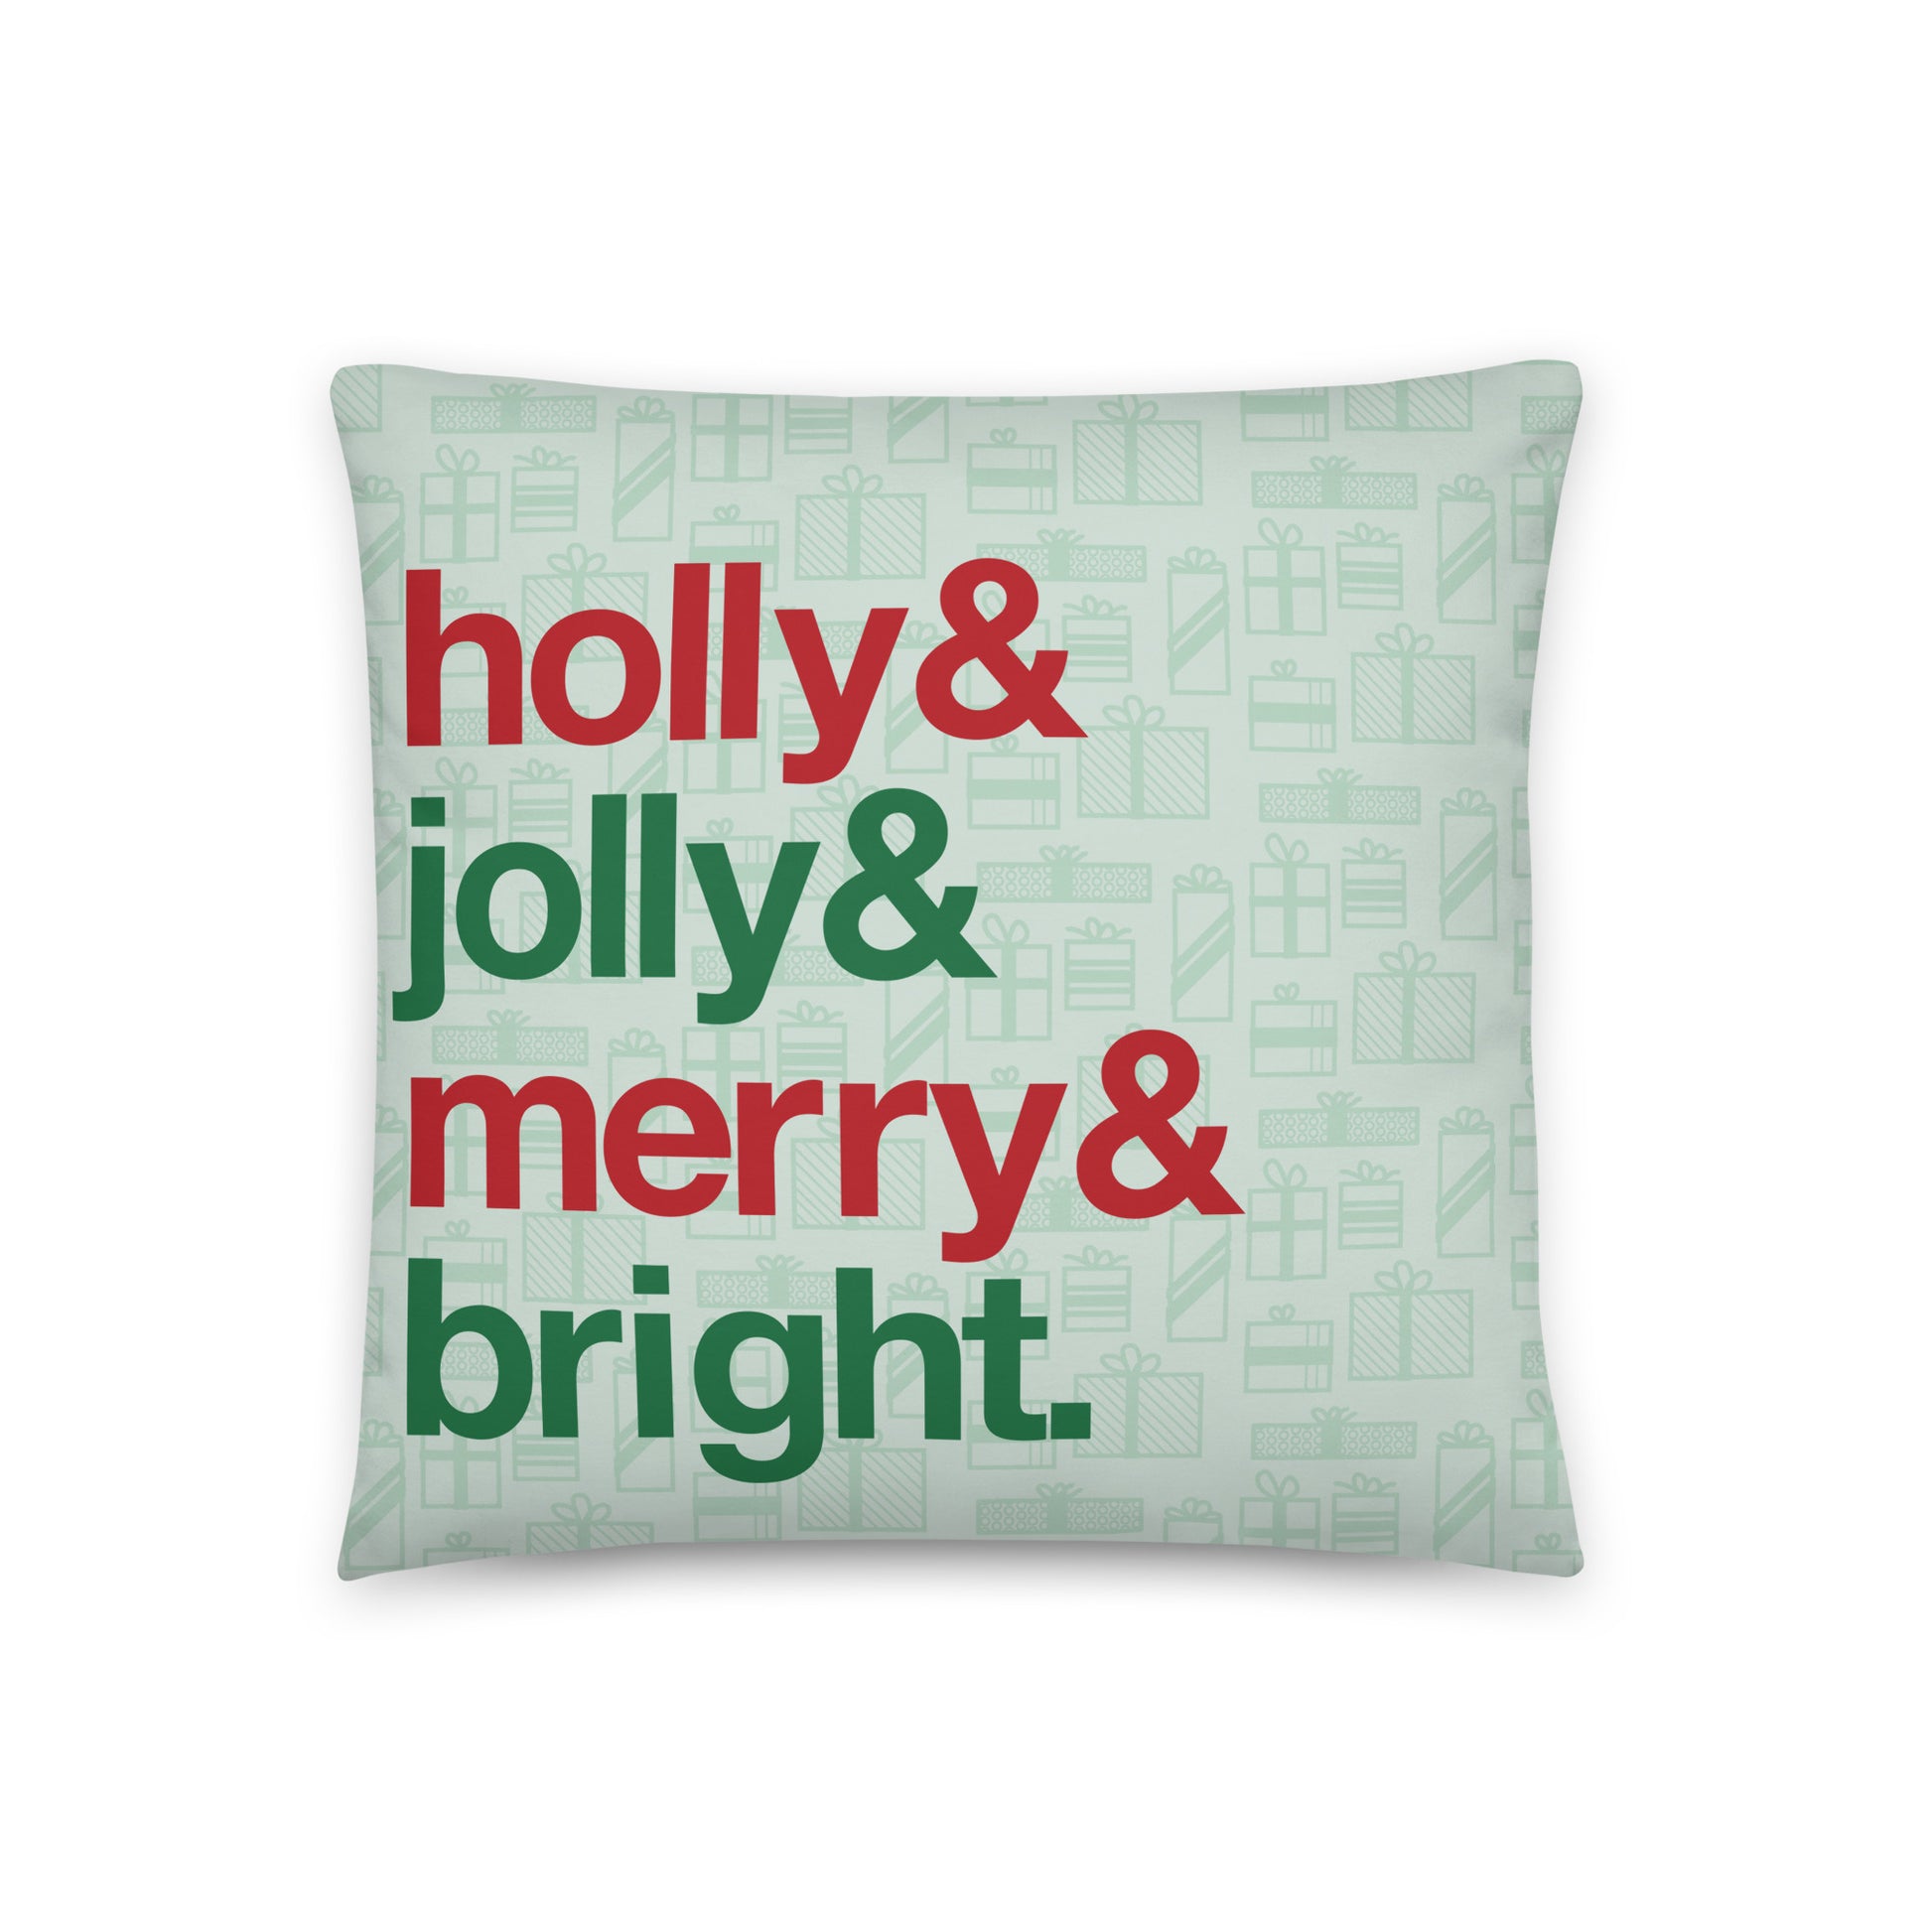 An 18" by 18" throw pillow decorated with a pale green background pattern of presents. There are also four lines of red and green text on the pillow that read "Holly & jolly & merry & bright"